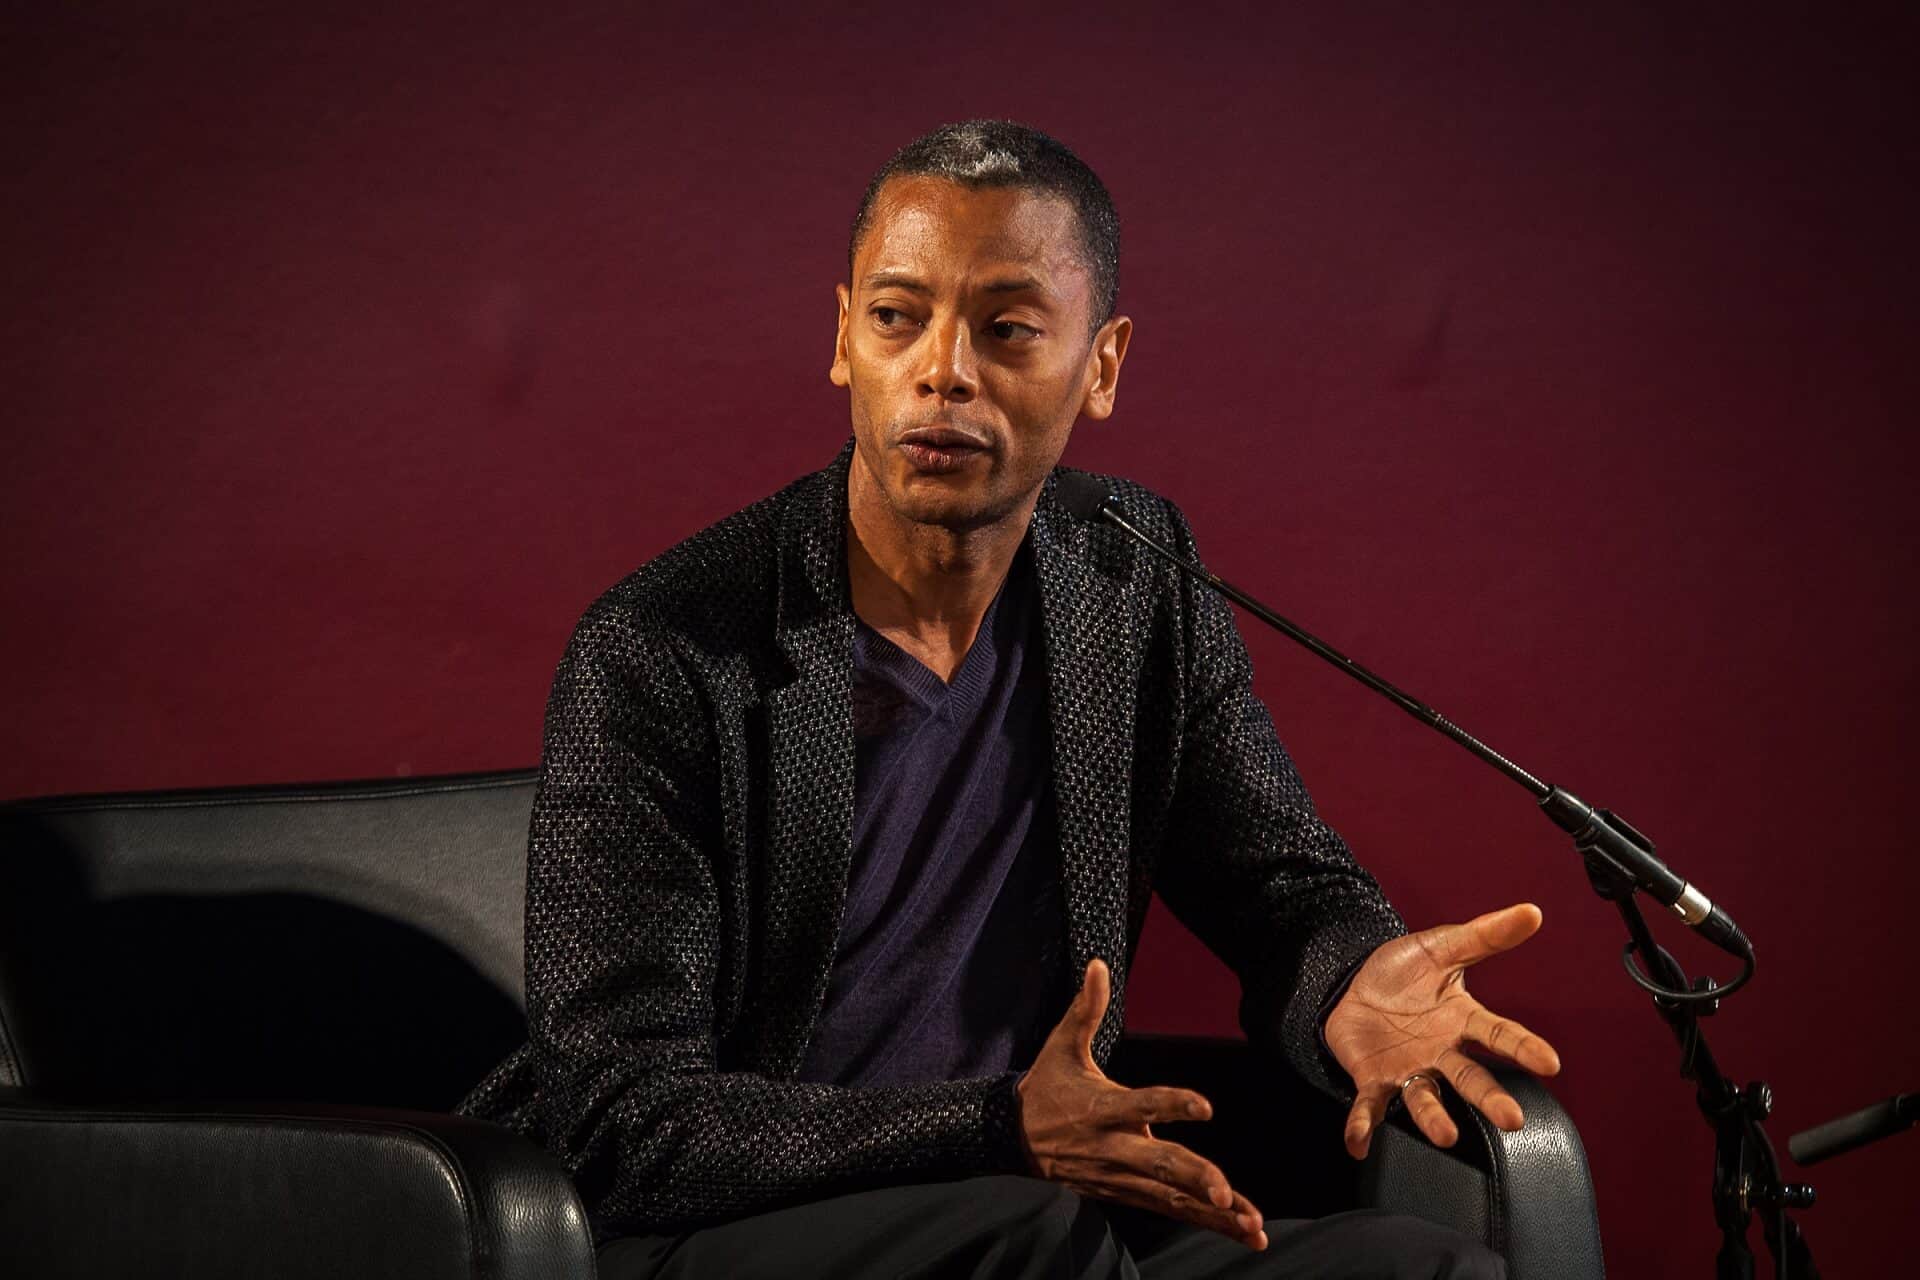 Jeff Mills provides soundtrack to Dior fashion show in Egypt